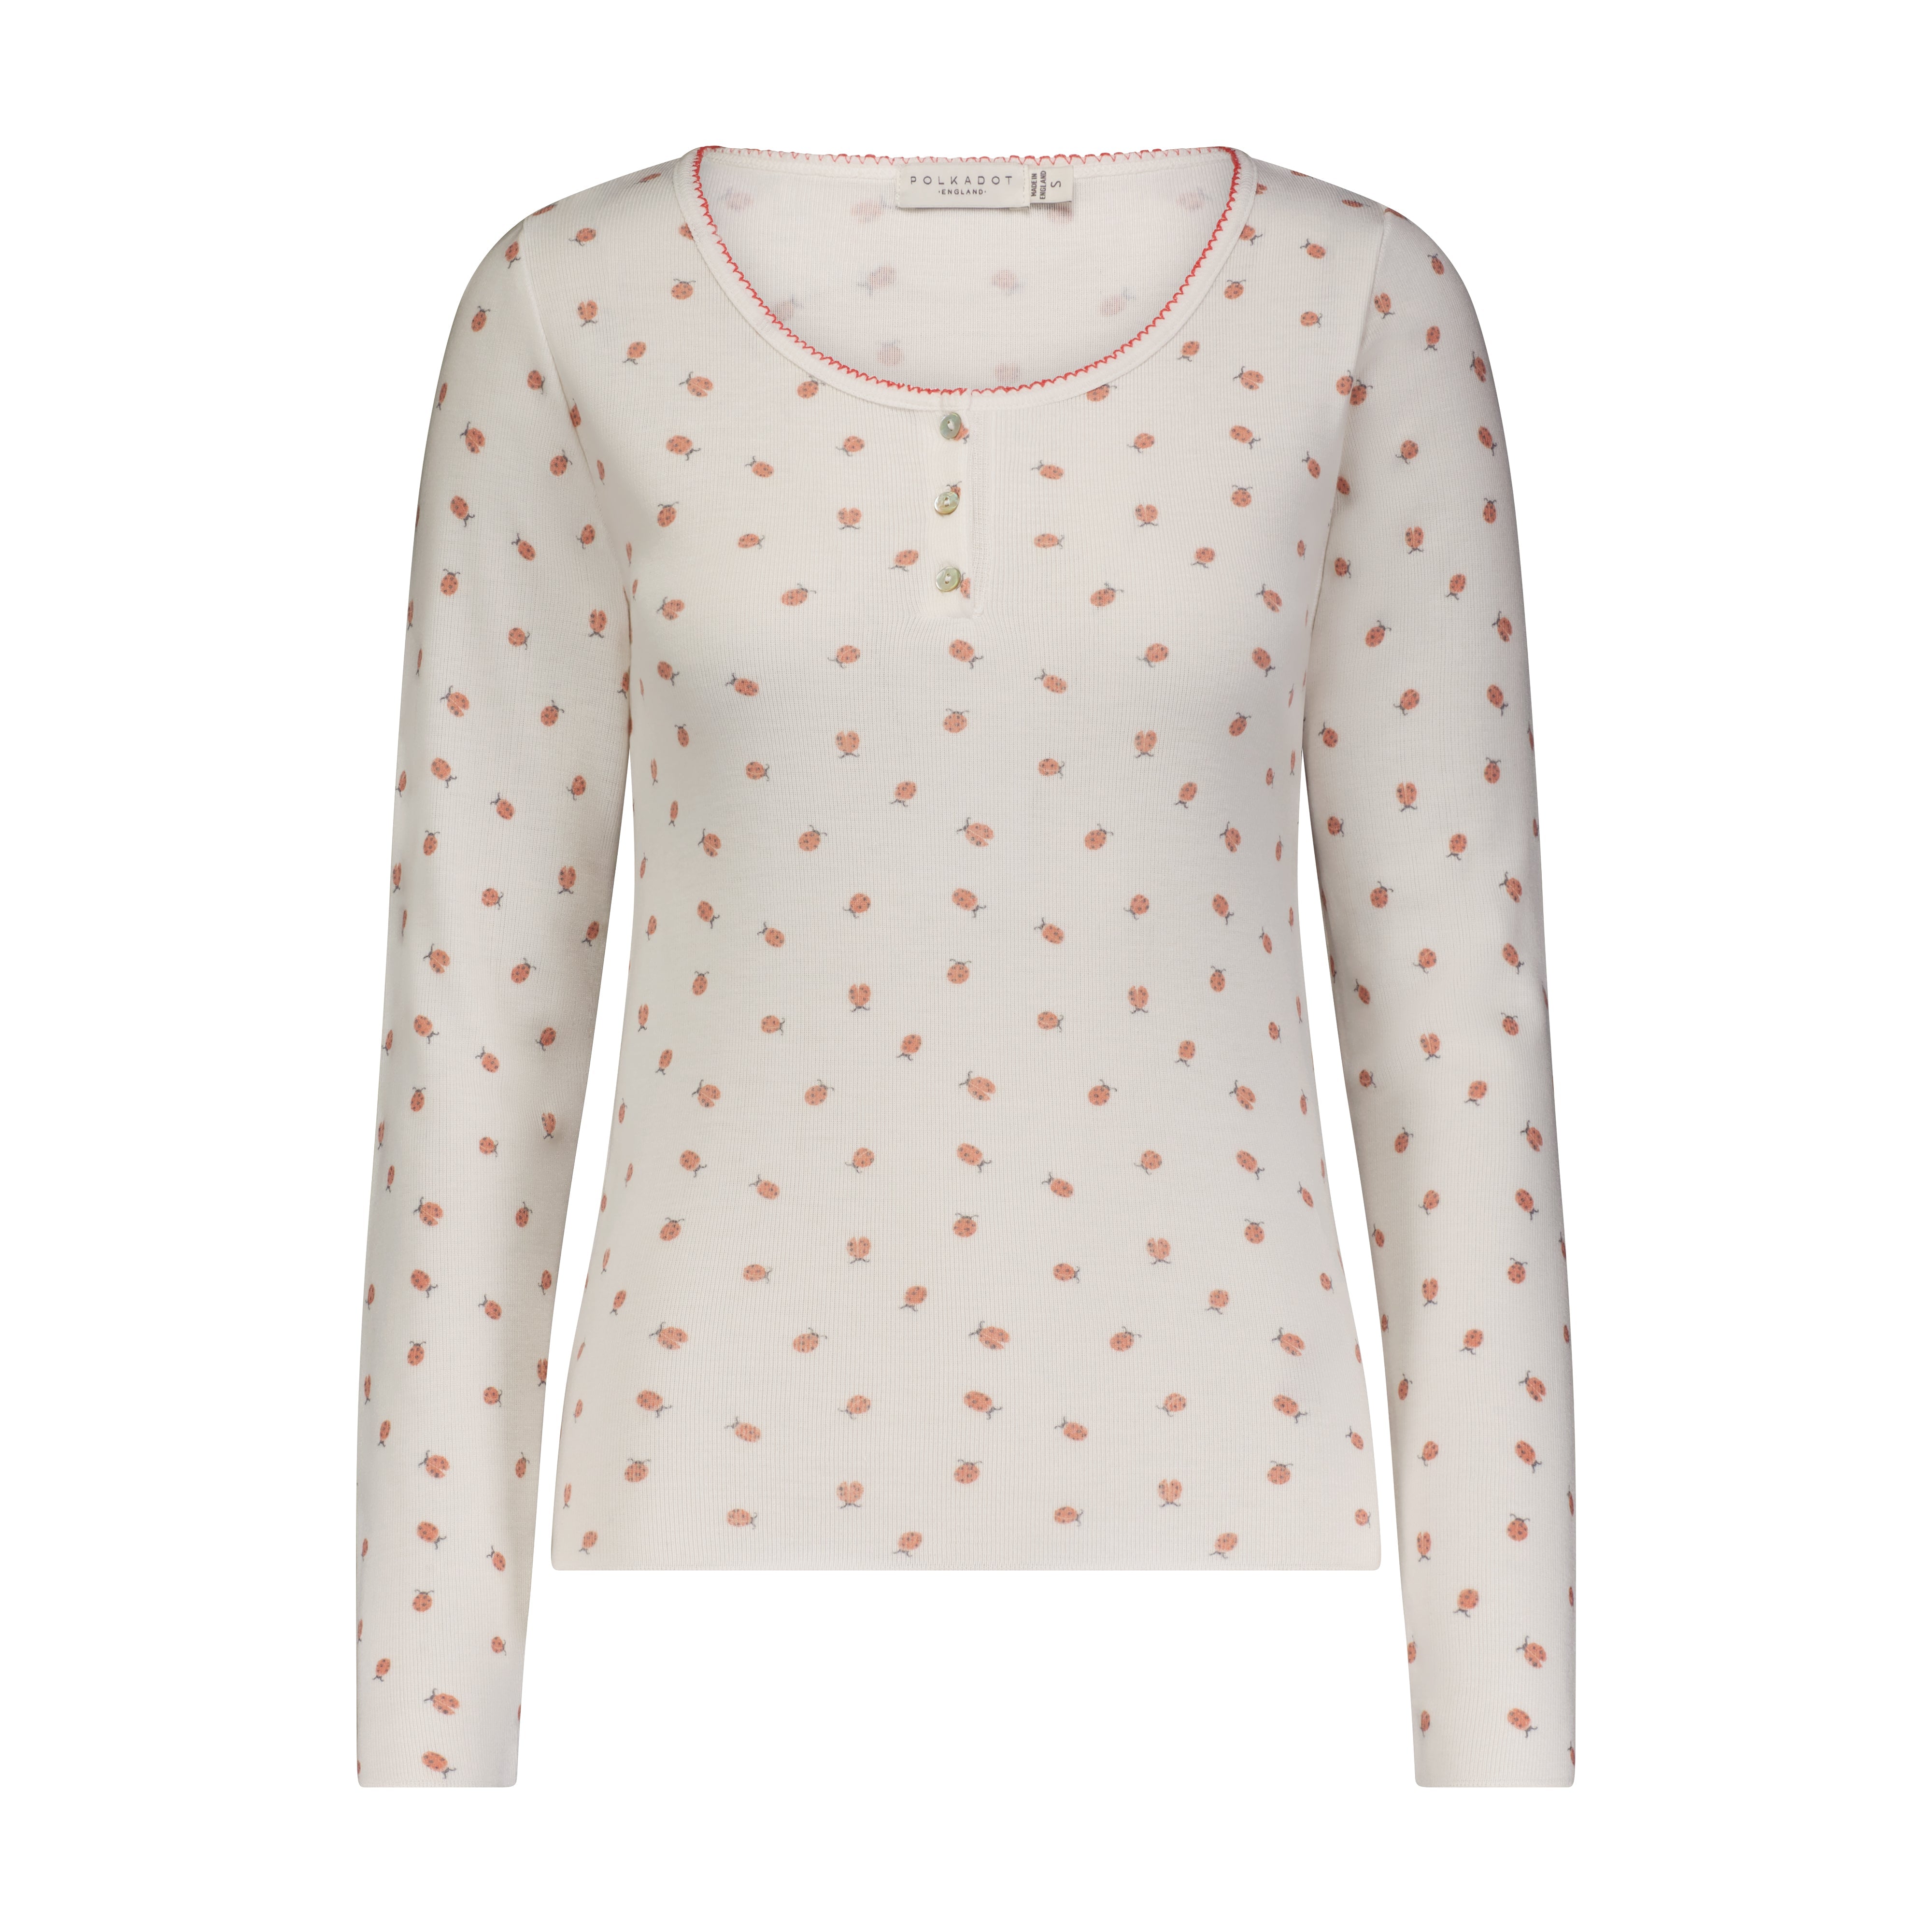 LUCKY LADYBUG Print HENLEY Fitted Crew LS